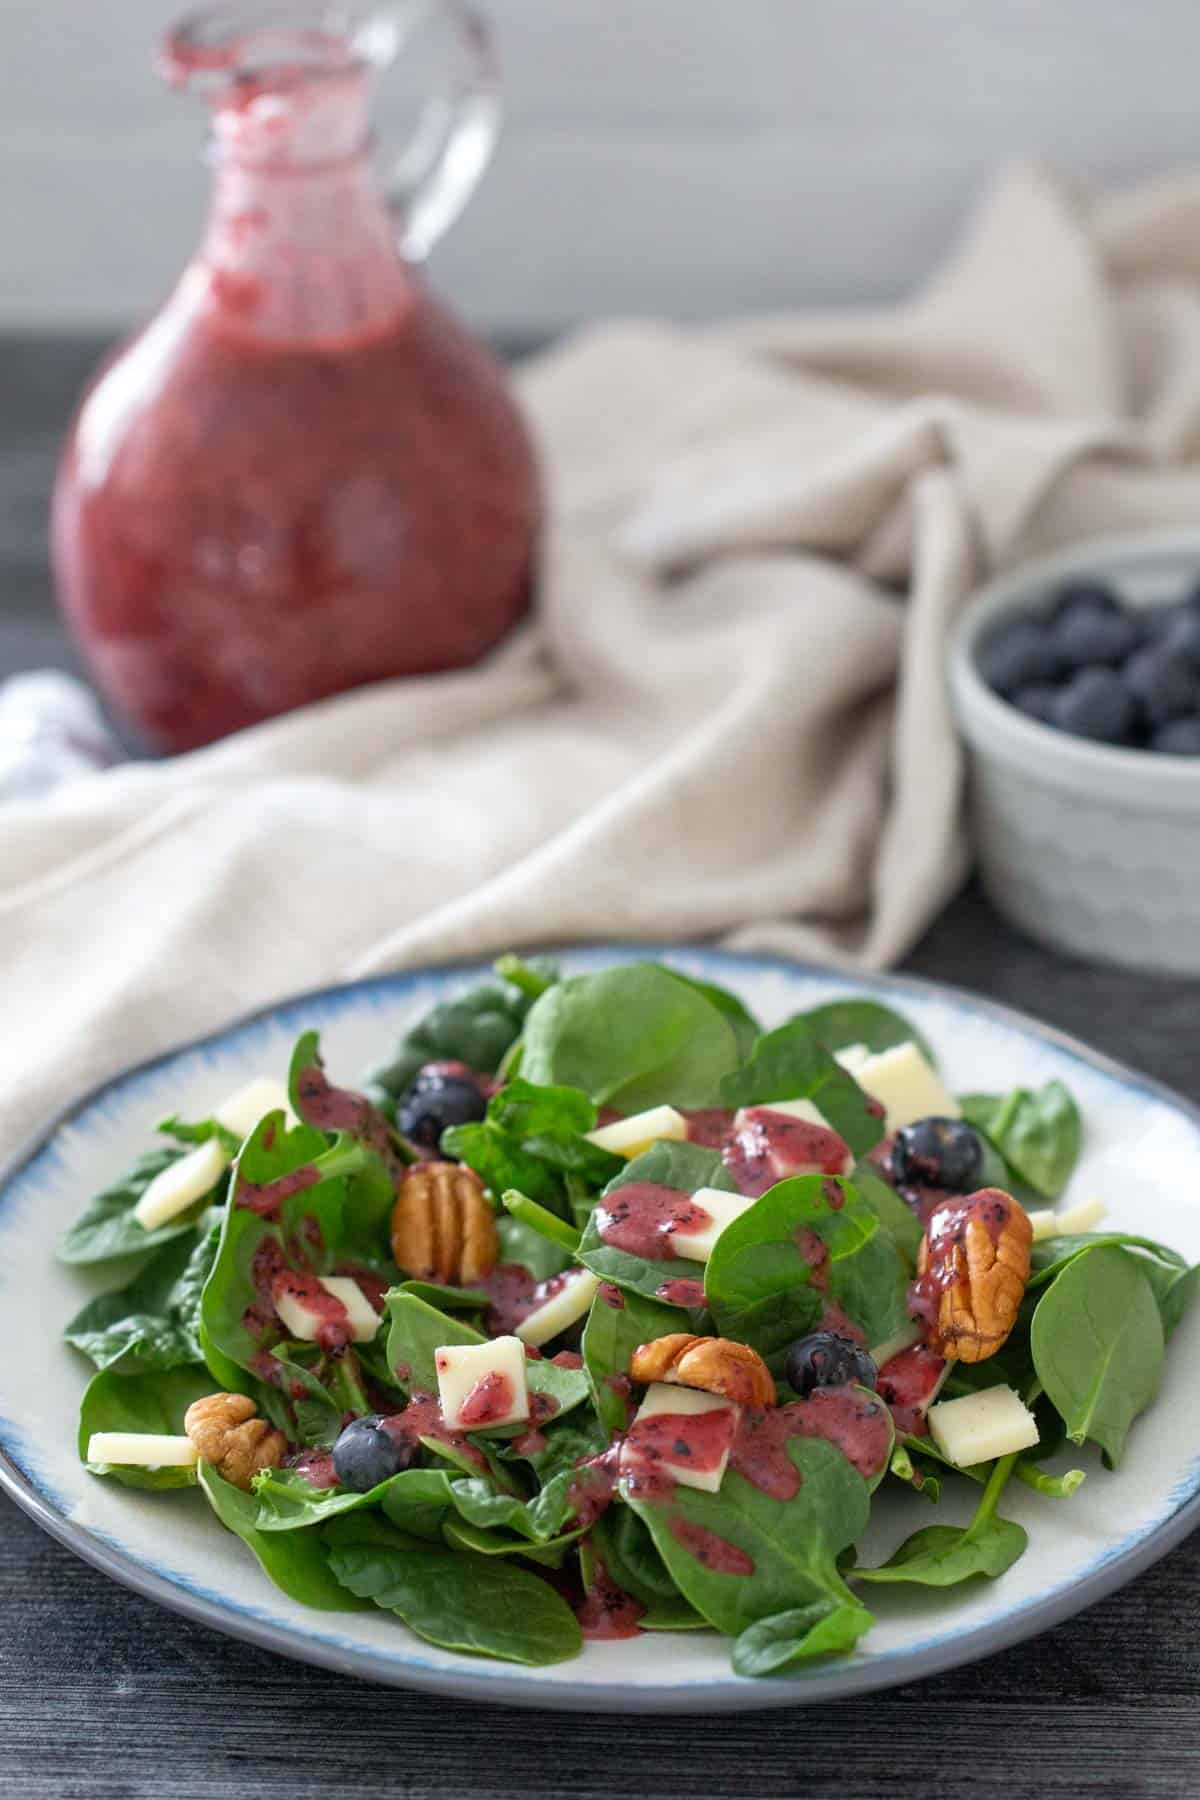 spinach salad dressed with blueberry vinaigrette